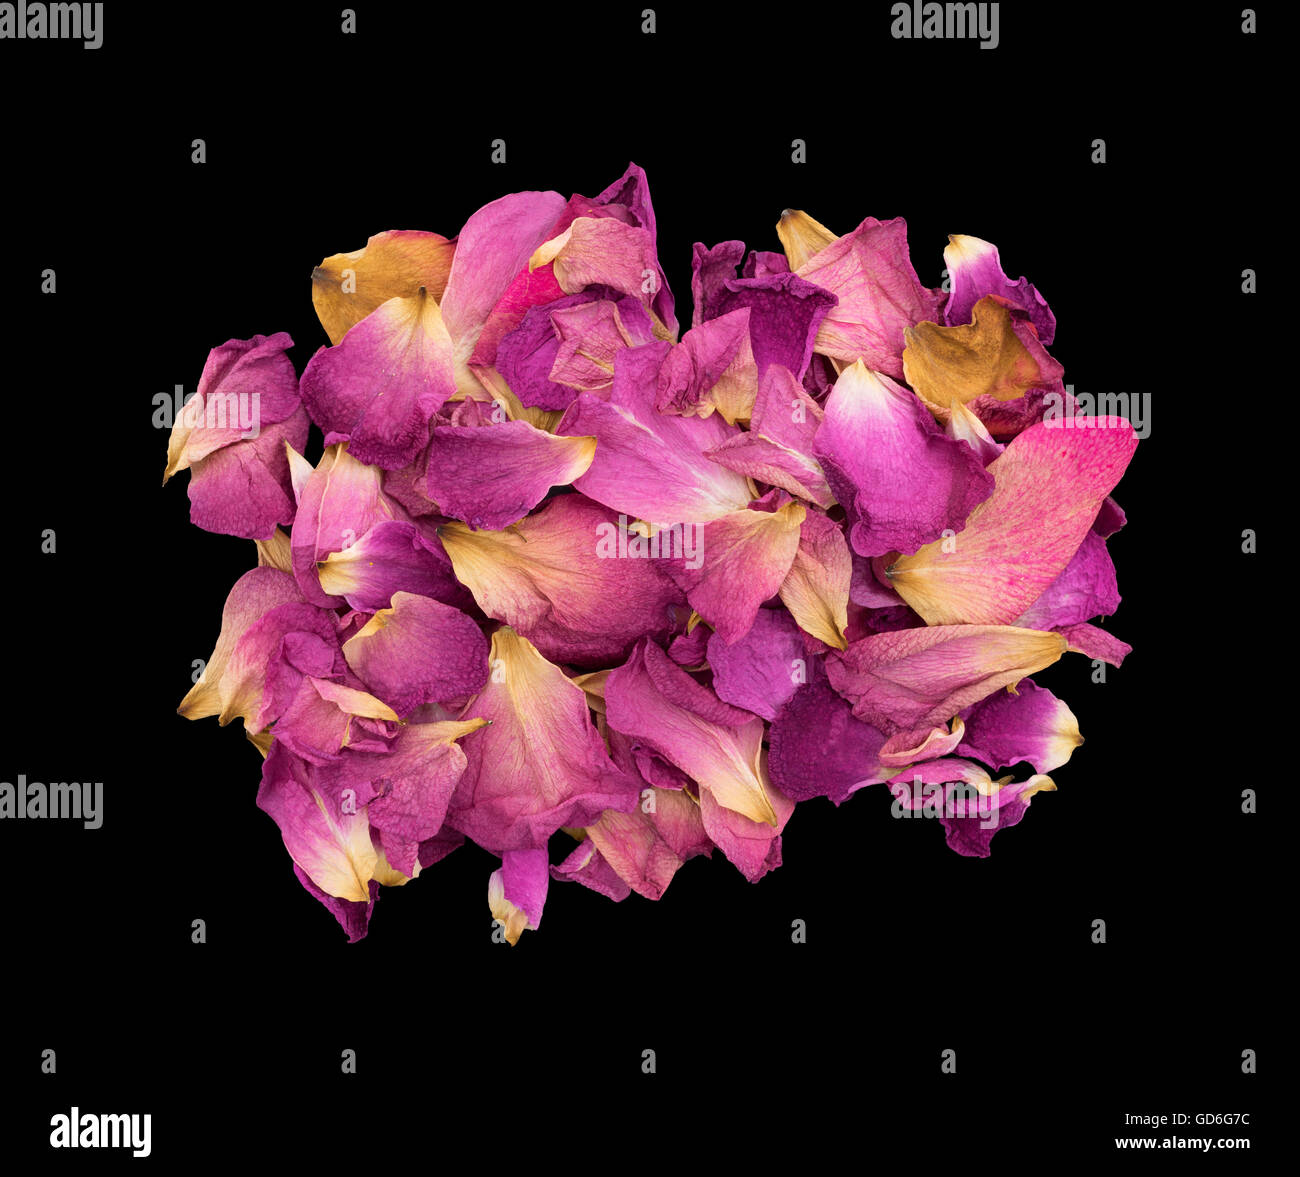 Rose petals withering and dying on a black background. Stock Photo